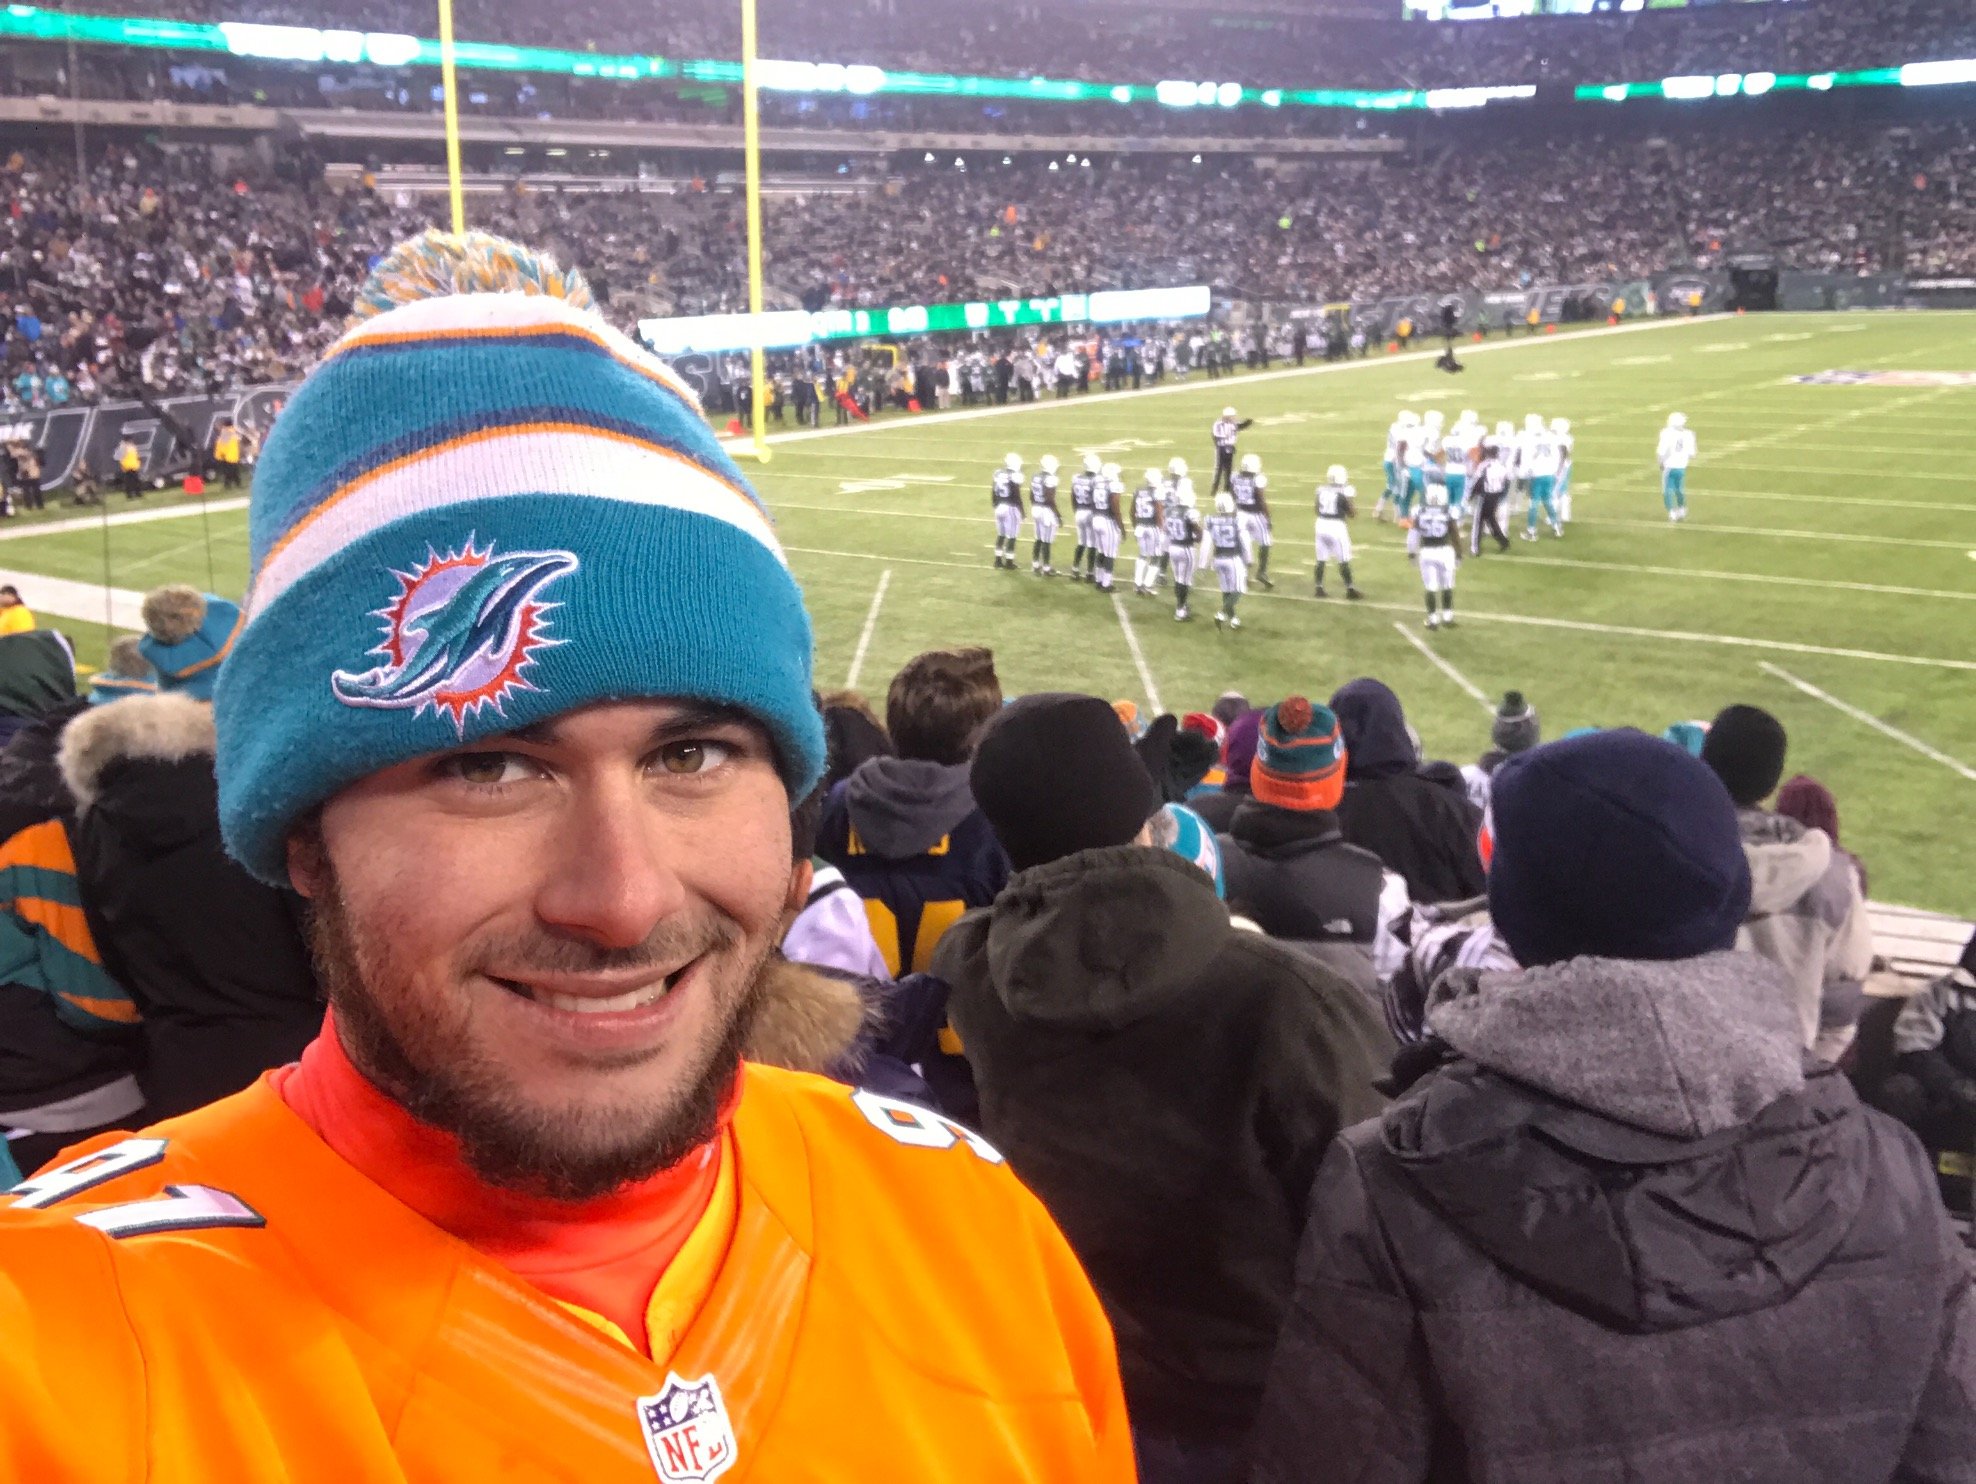 32 from NJ, graduated from La Salle University in 2012. Work for Dhs.  Huge sports fan, and avid autograph/memorabilia collector. Miami Dolphins equal life.🐬⬆️